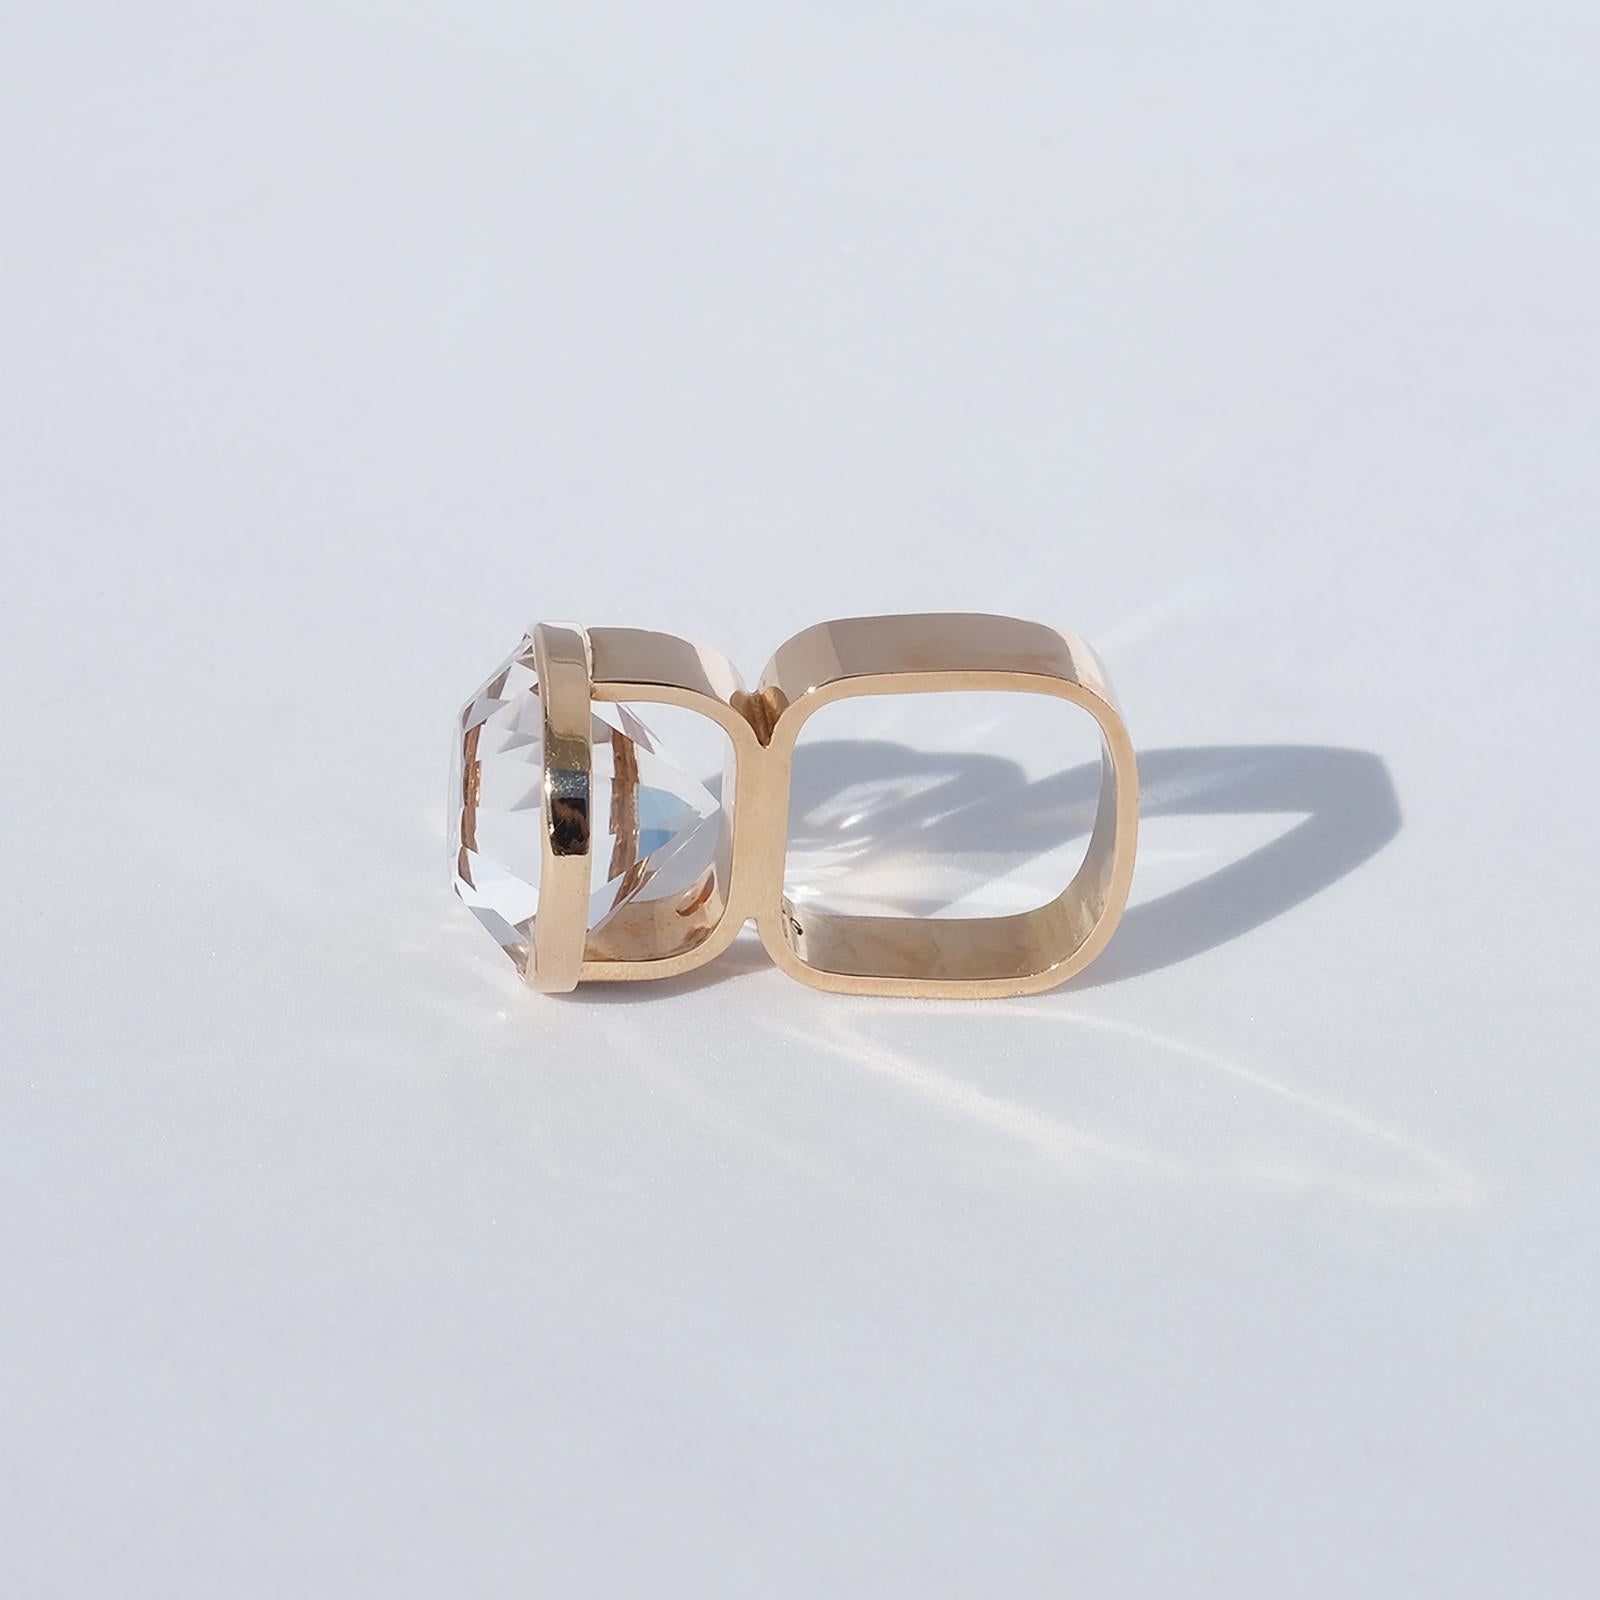 This luxurious 18 karat gold ring has a very unusual shape with its square shaped shank and its large brilliant cut rock crystal shown in cross section.

This is a ring perfect for coctail partys and social gatherings in general.

Did you know